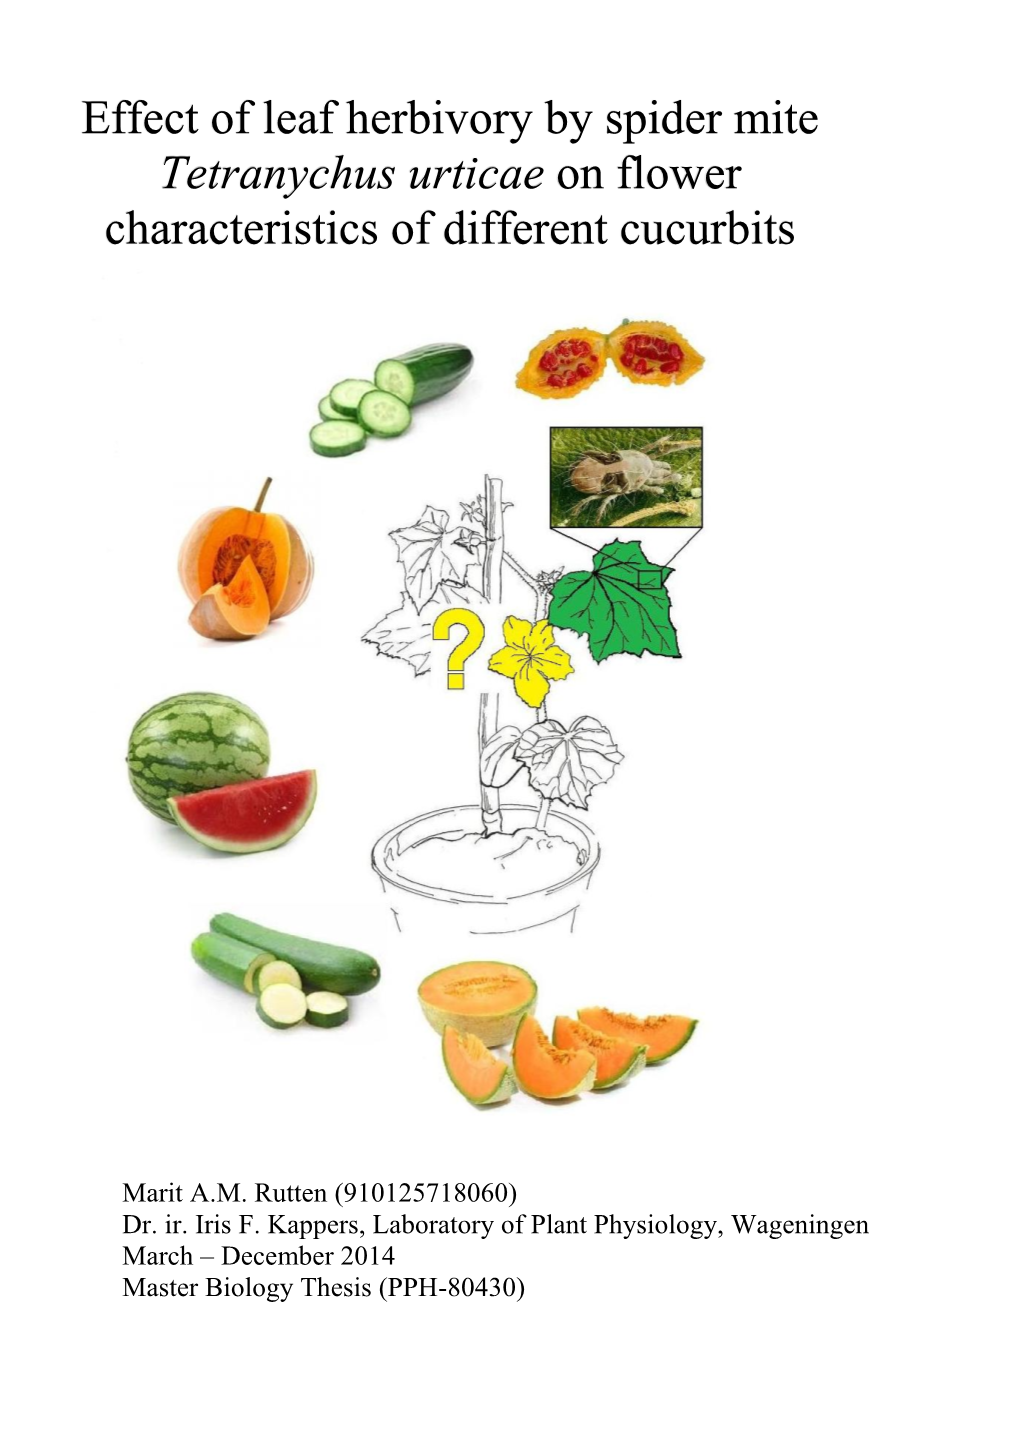 Effect of Leaf Herbivory by Spider Mite Tetranychus Urticae on Flower Characteristics of Different Cucurbits